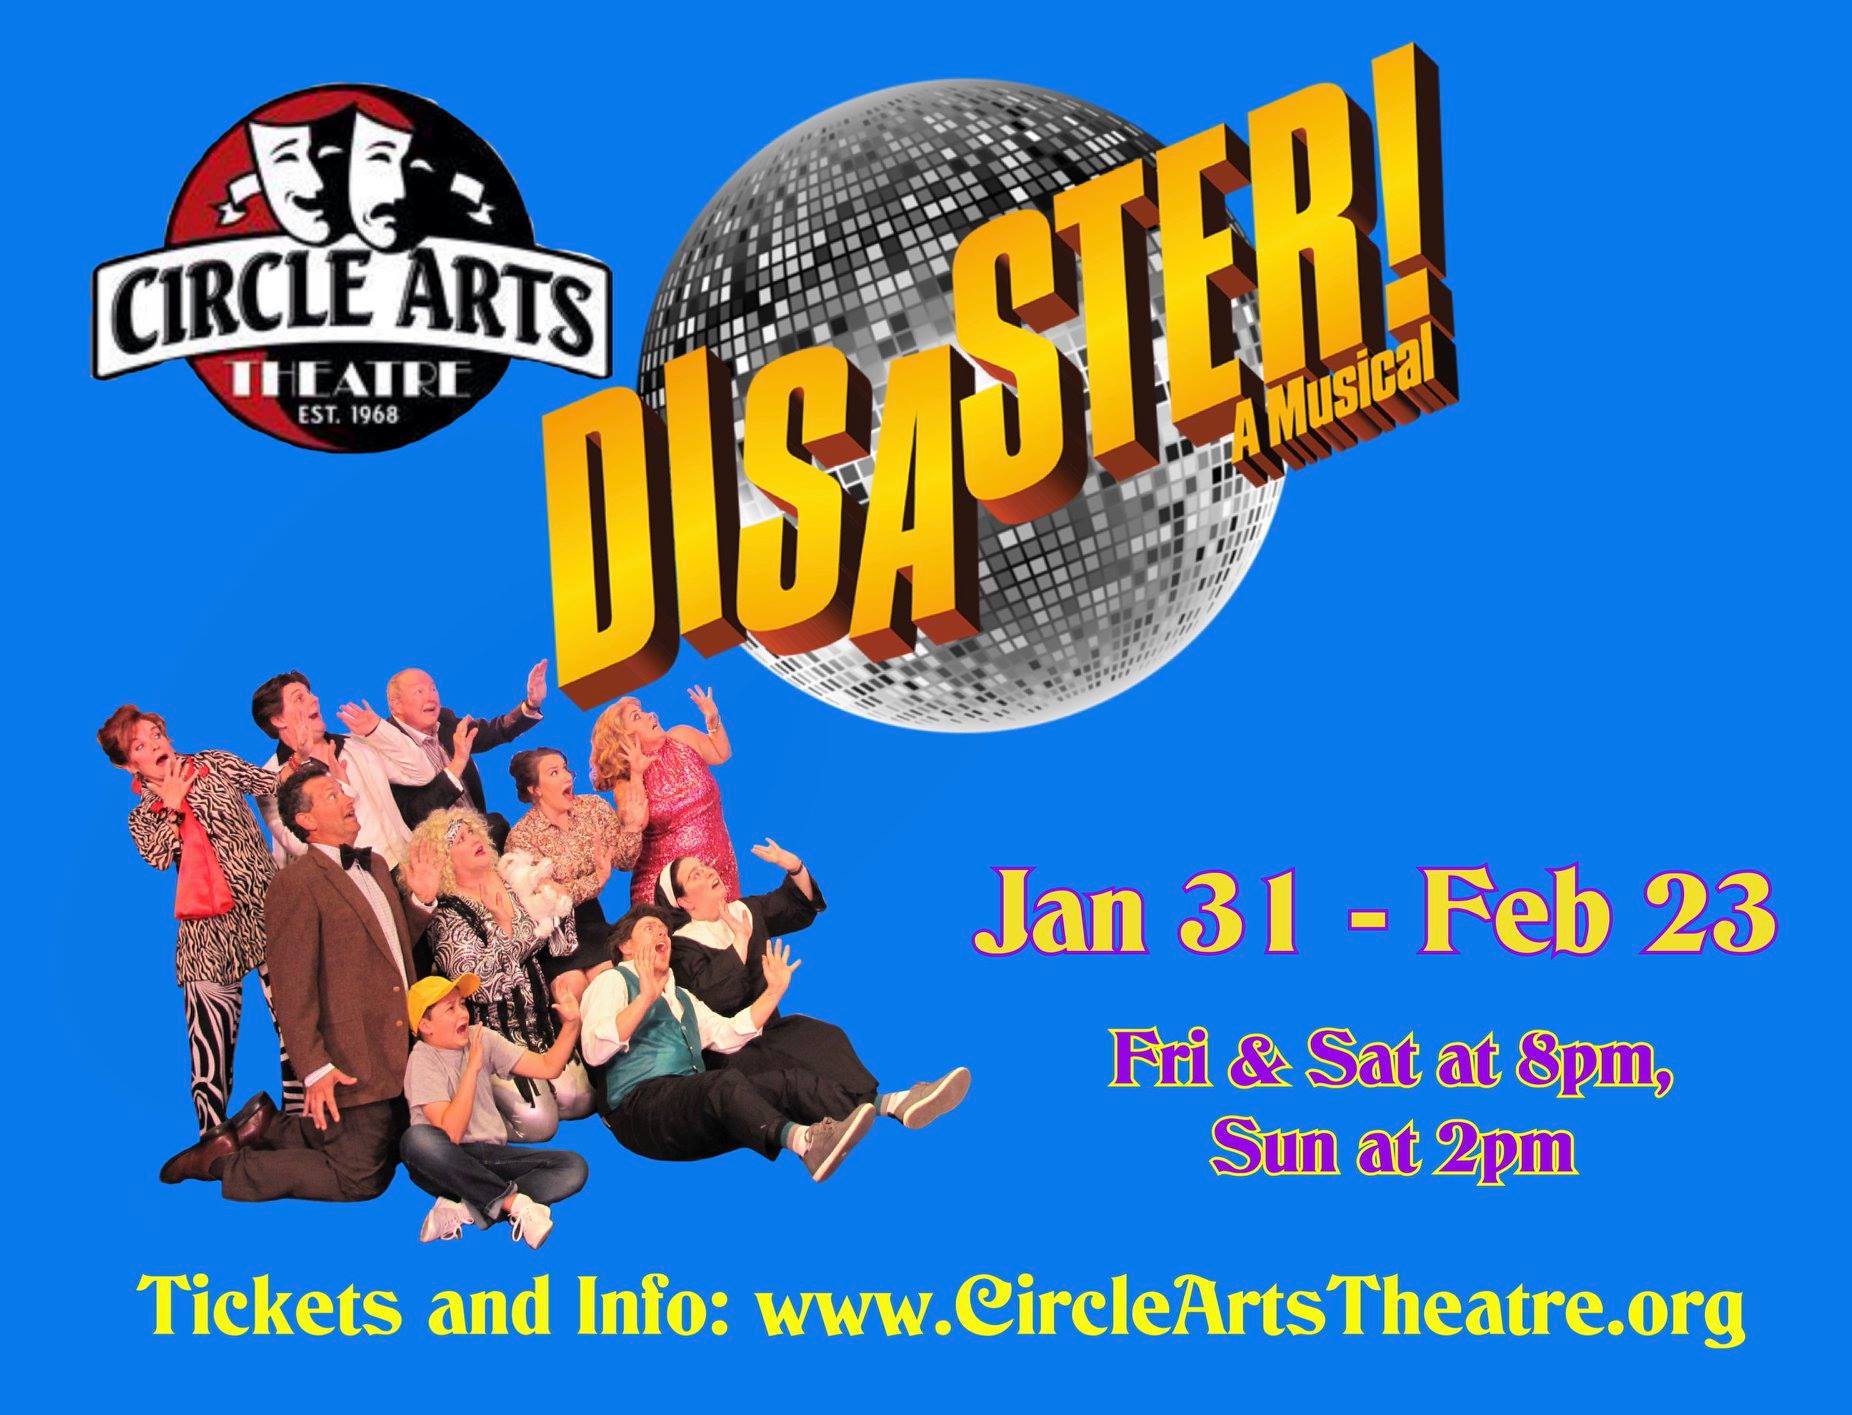 The incredible cast of Disaster! the Musical had audiences rolling with laughter on opening night!